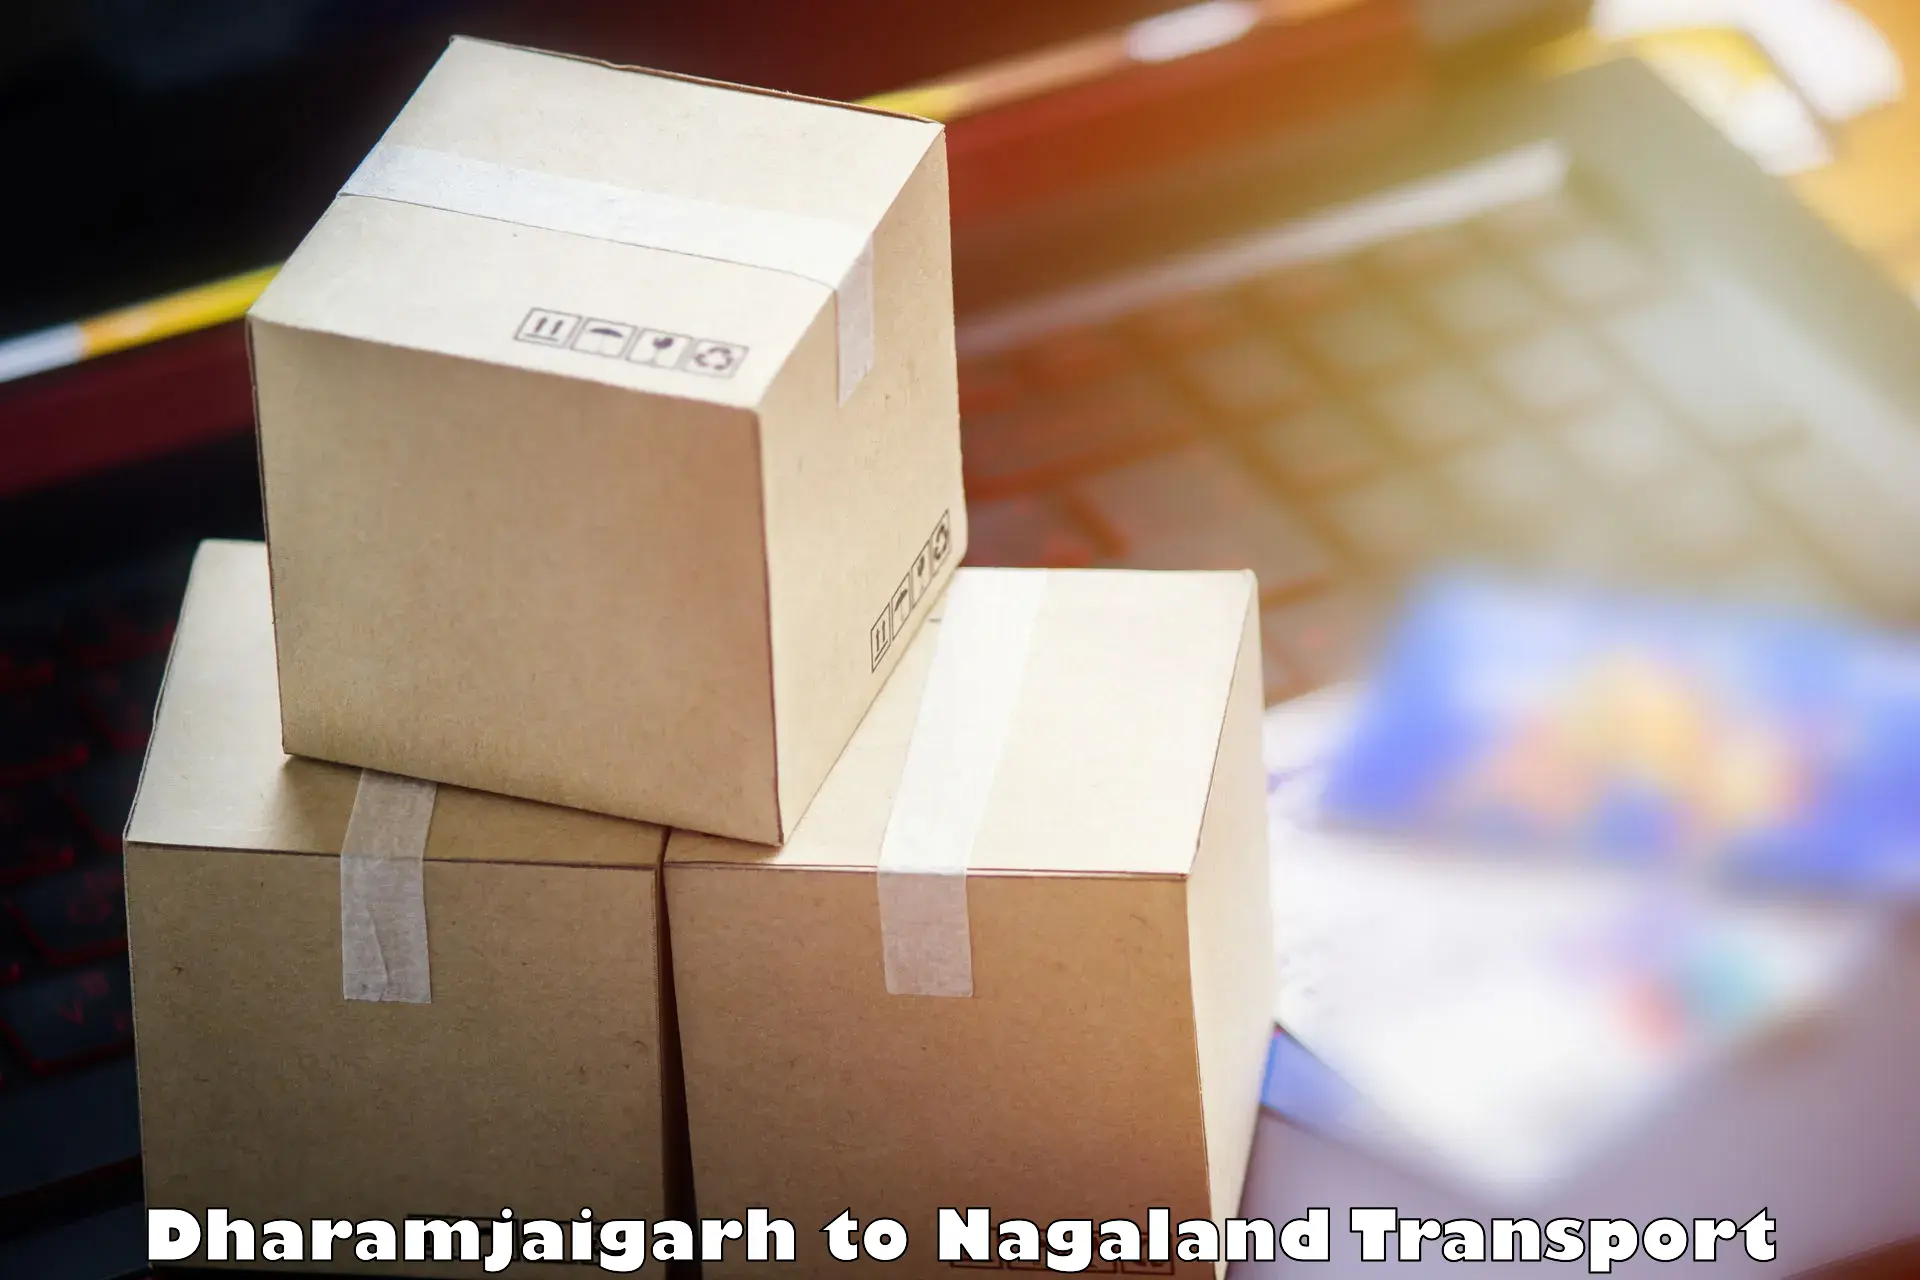 Furniture transport service in Dharamjaigarh to Nagaland